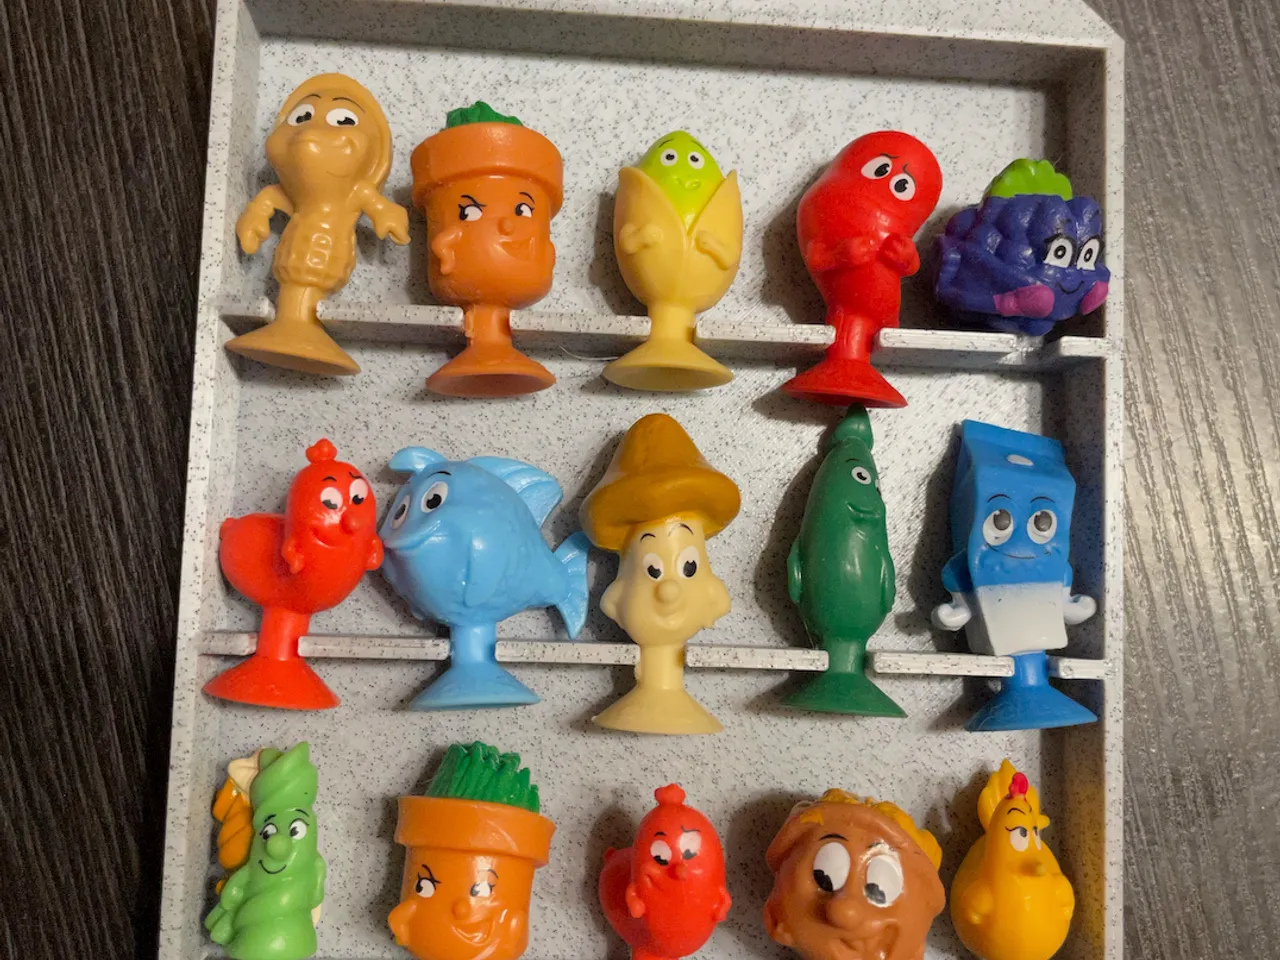 Stikeez Lidl Various Collectable Toy Figures 